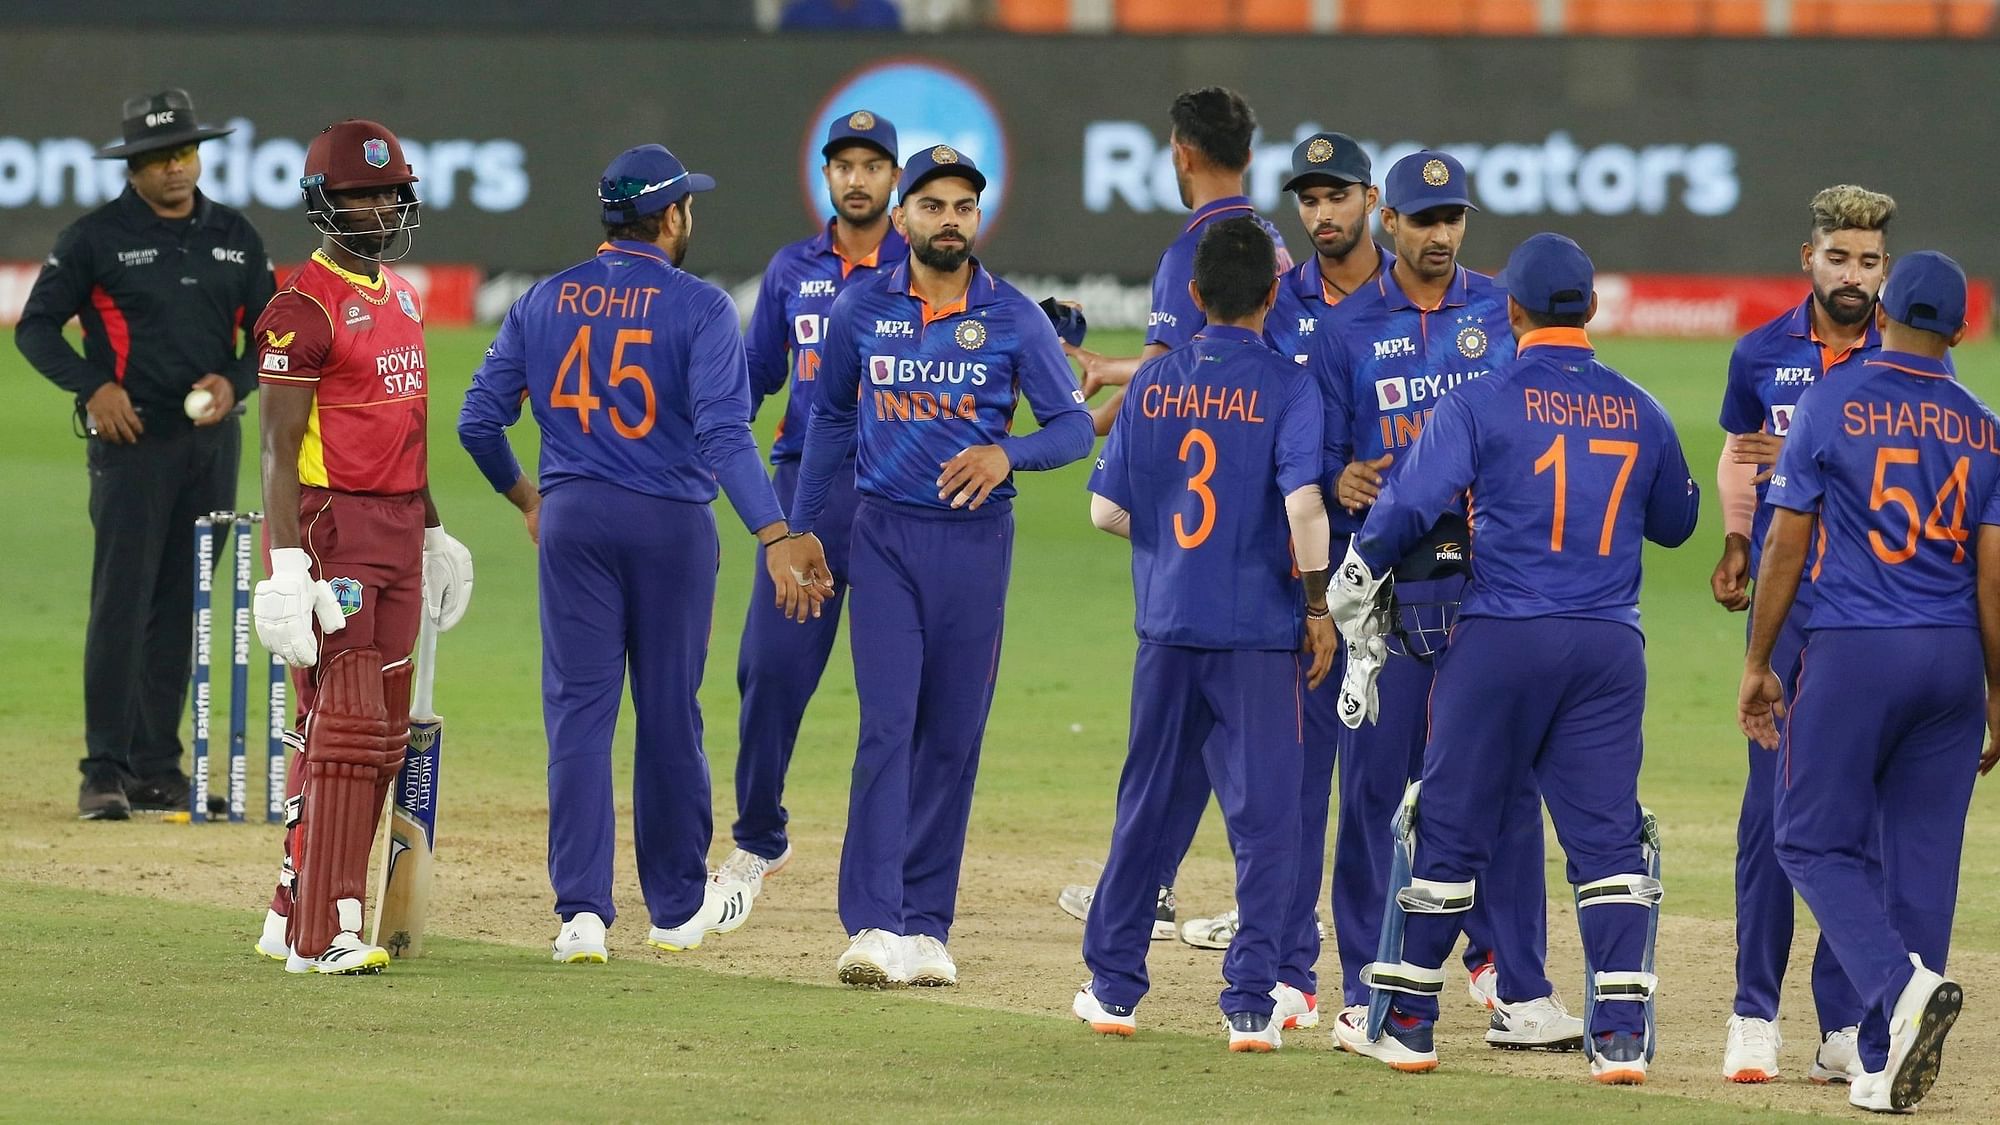 India vs West Indies Live Match India vs West Indies 3rd ODI 2022 Live Streaming in India, Know Live Score and Other Details